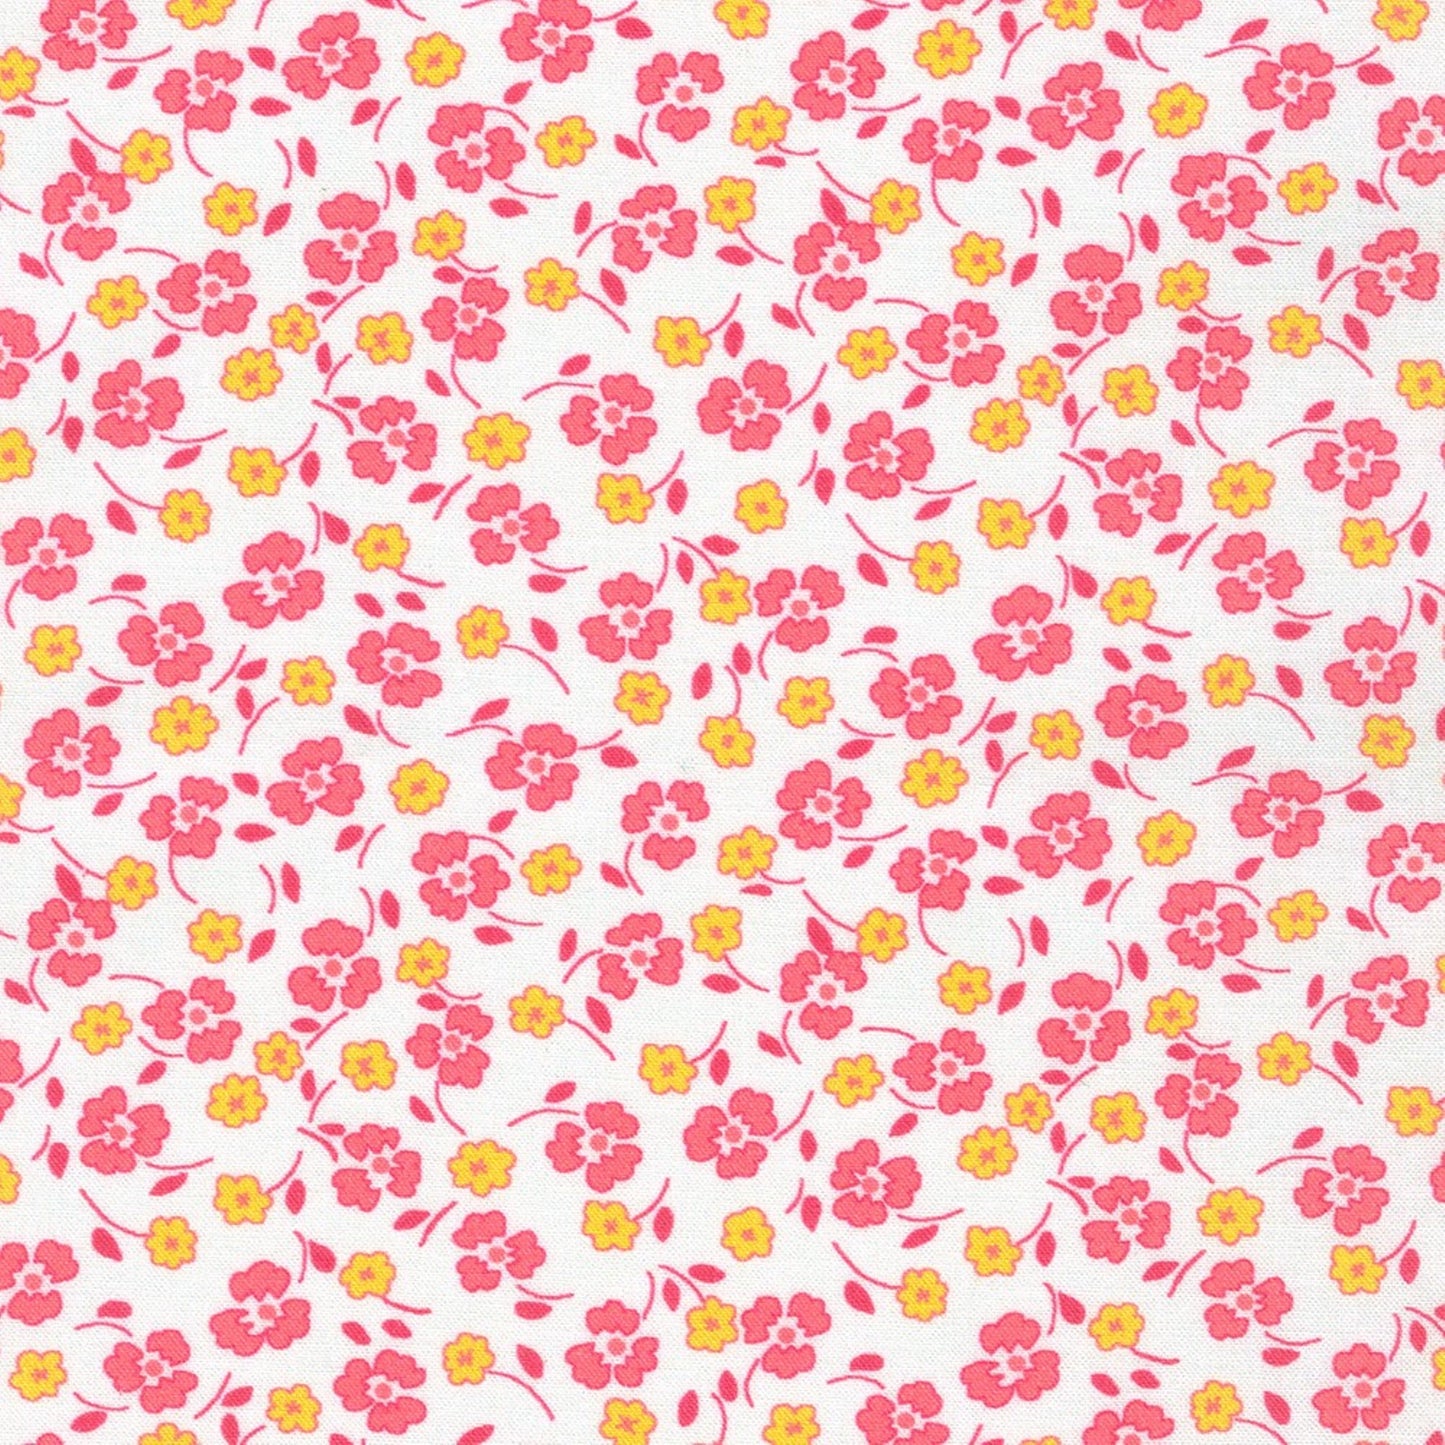 Little Blossoms tossed flowers pink 1930's style floral Kaufman cotton quilt fabric